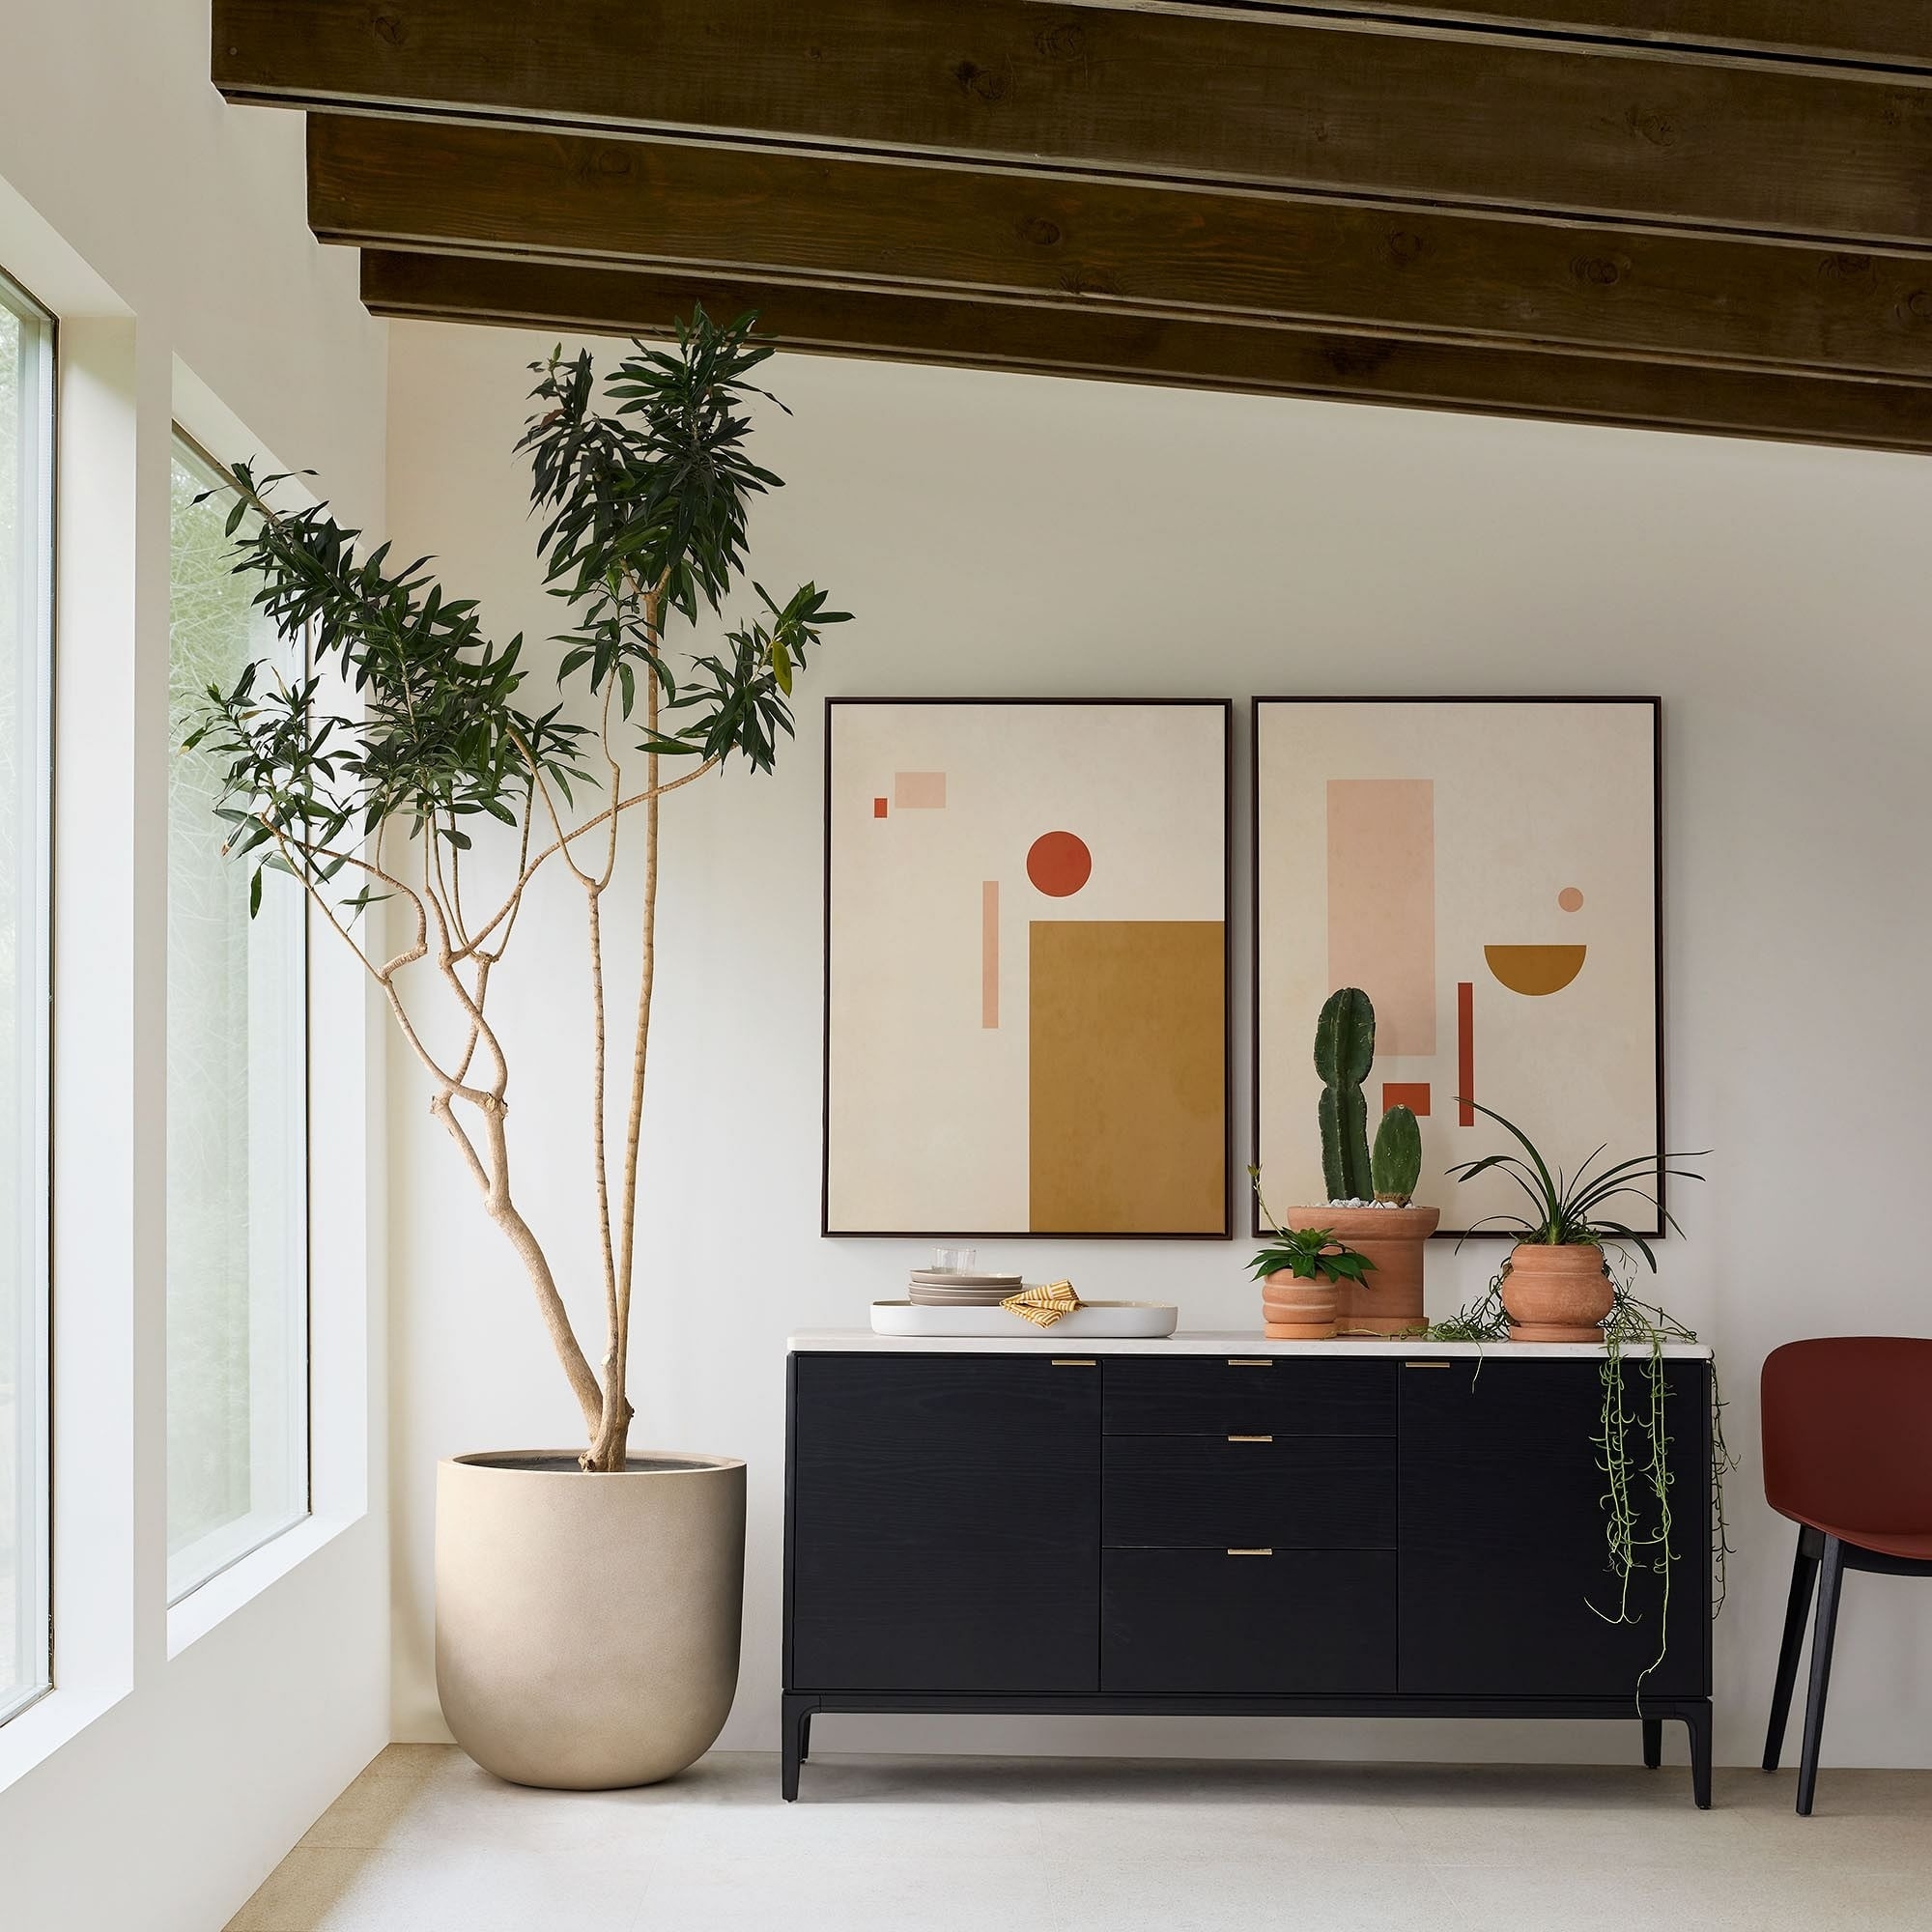 A minimalist room with a sleek sideboard, two abstract paintings, a potted plant, and decor items, evoking a modern aesthetic for shopping inspiration